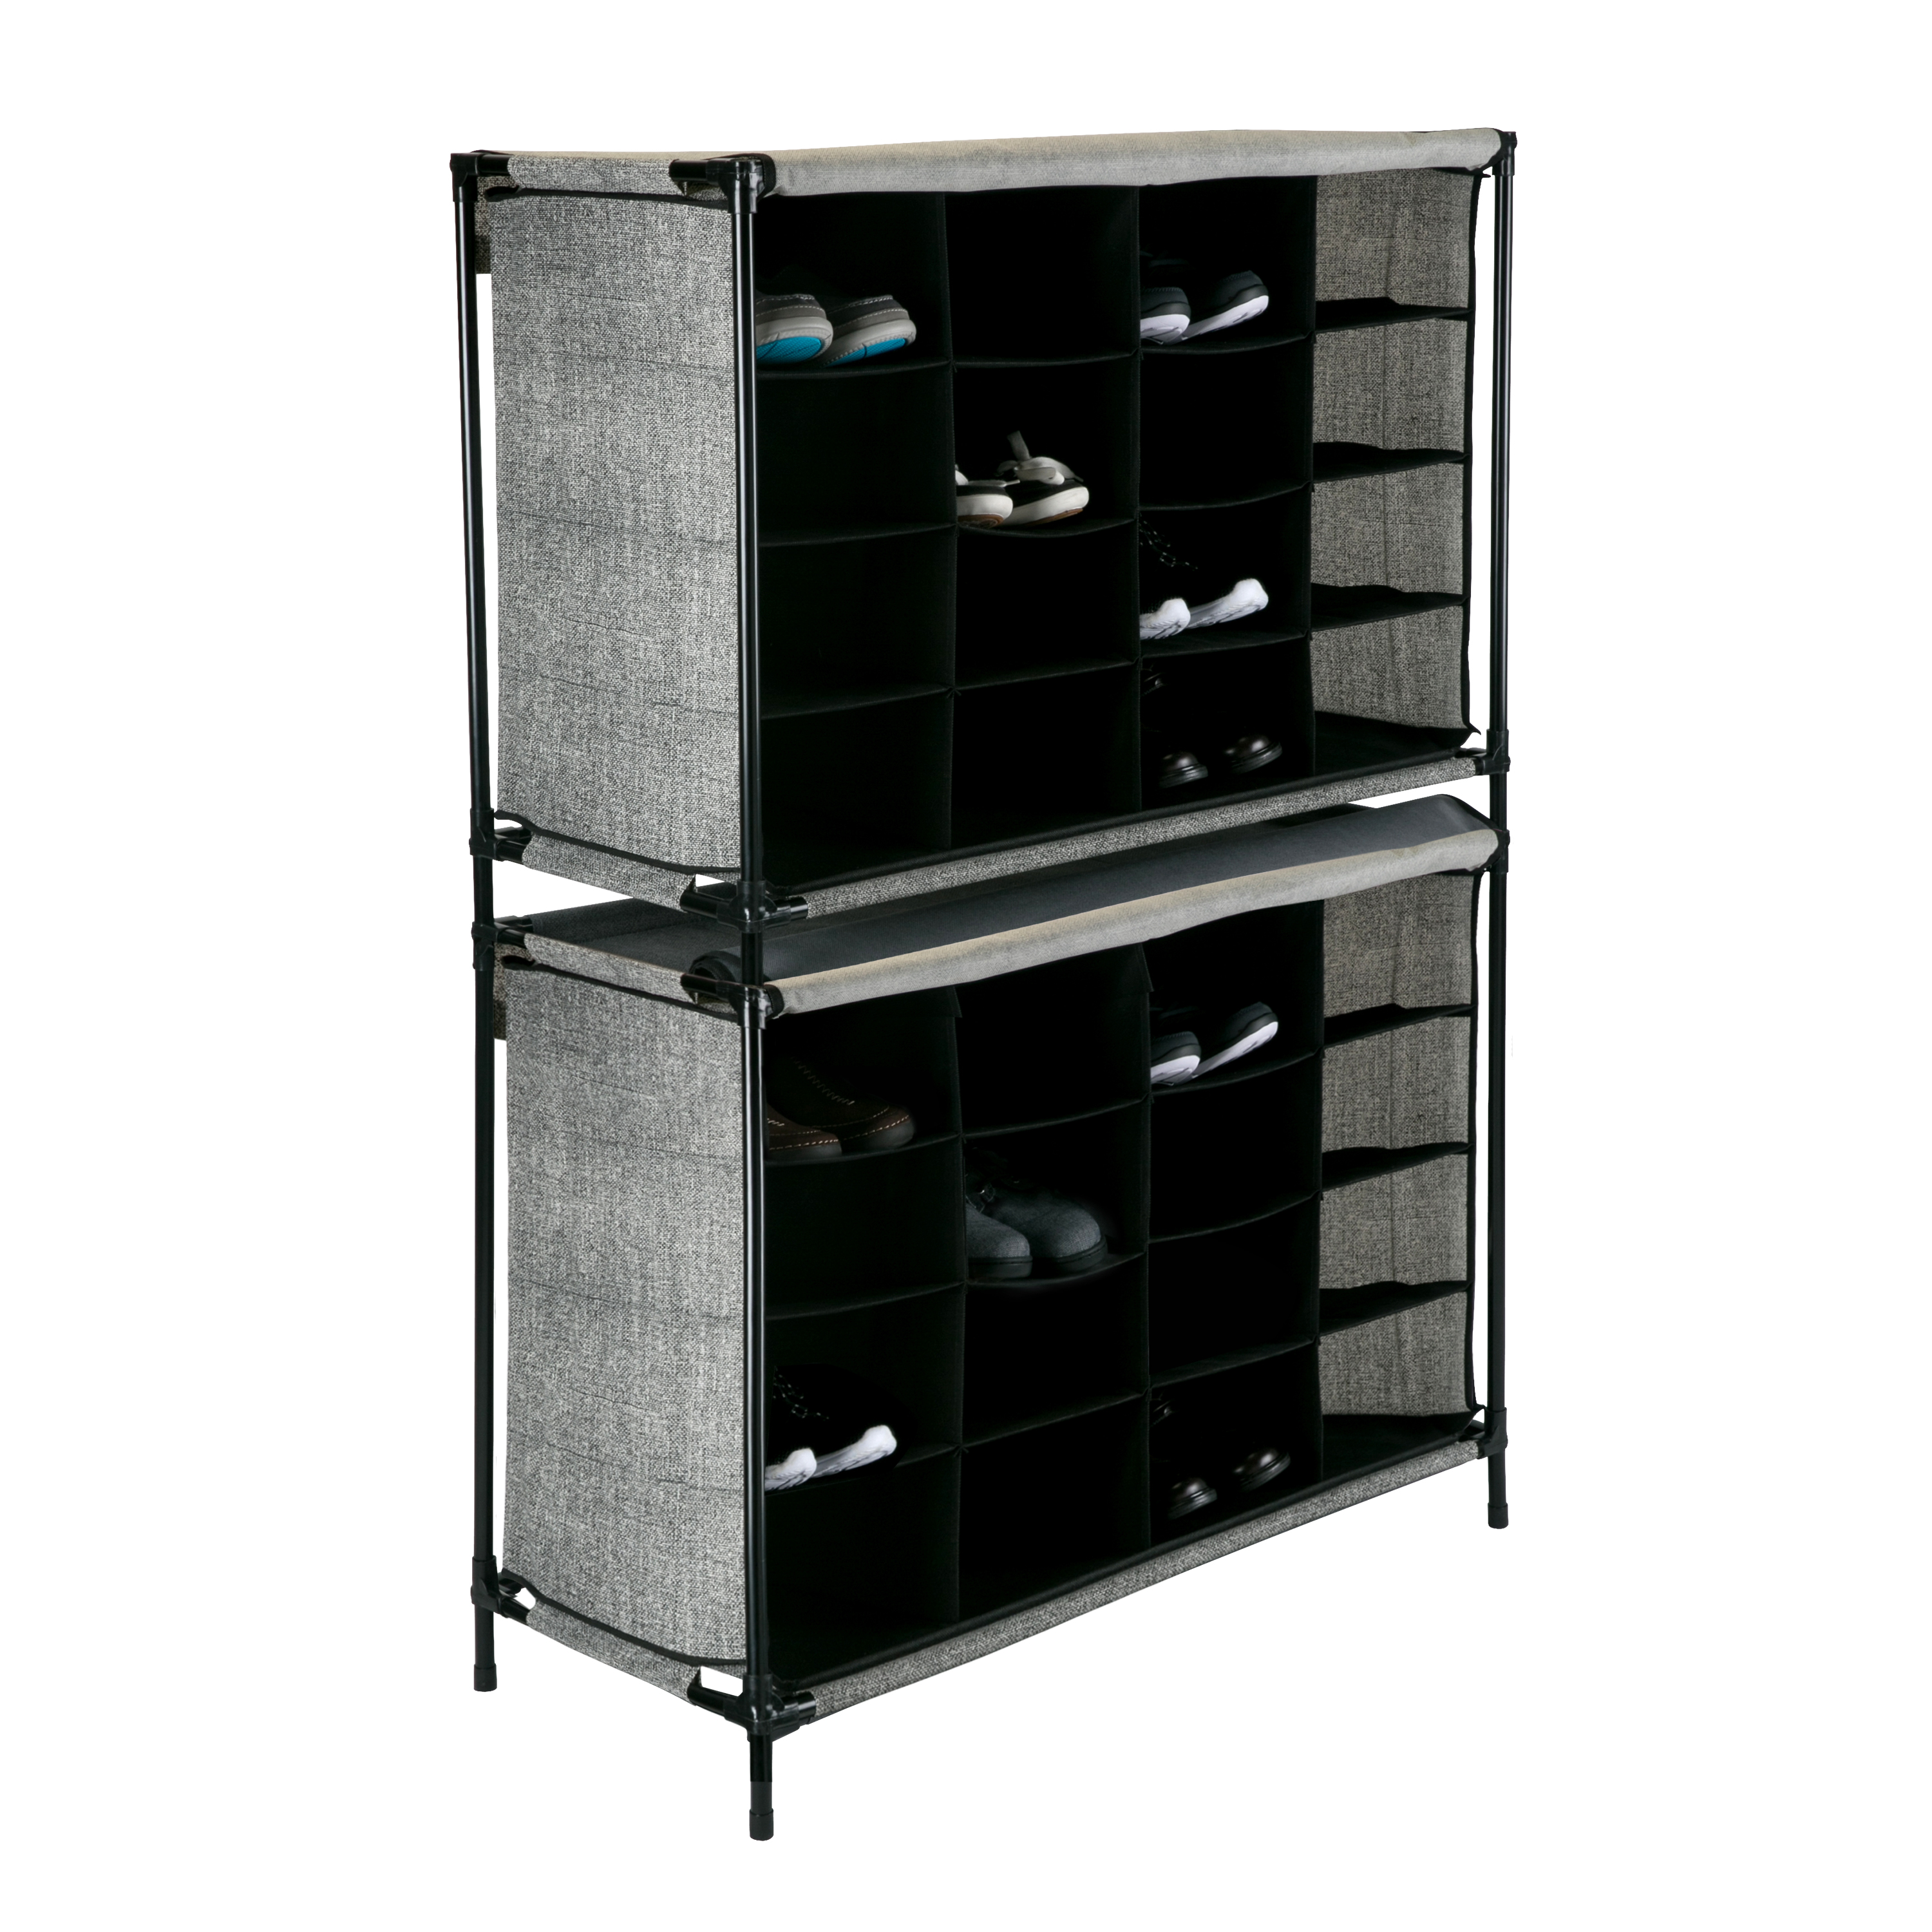 Simplify 16 Compartment 4 Tier Fabric Shoe Cubby in Black - image 4 of 10